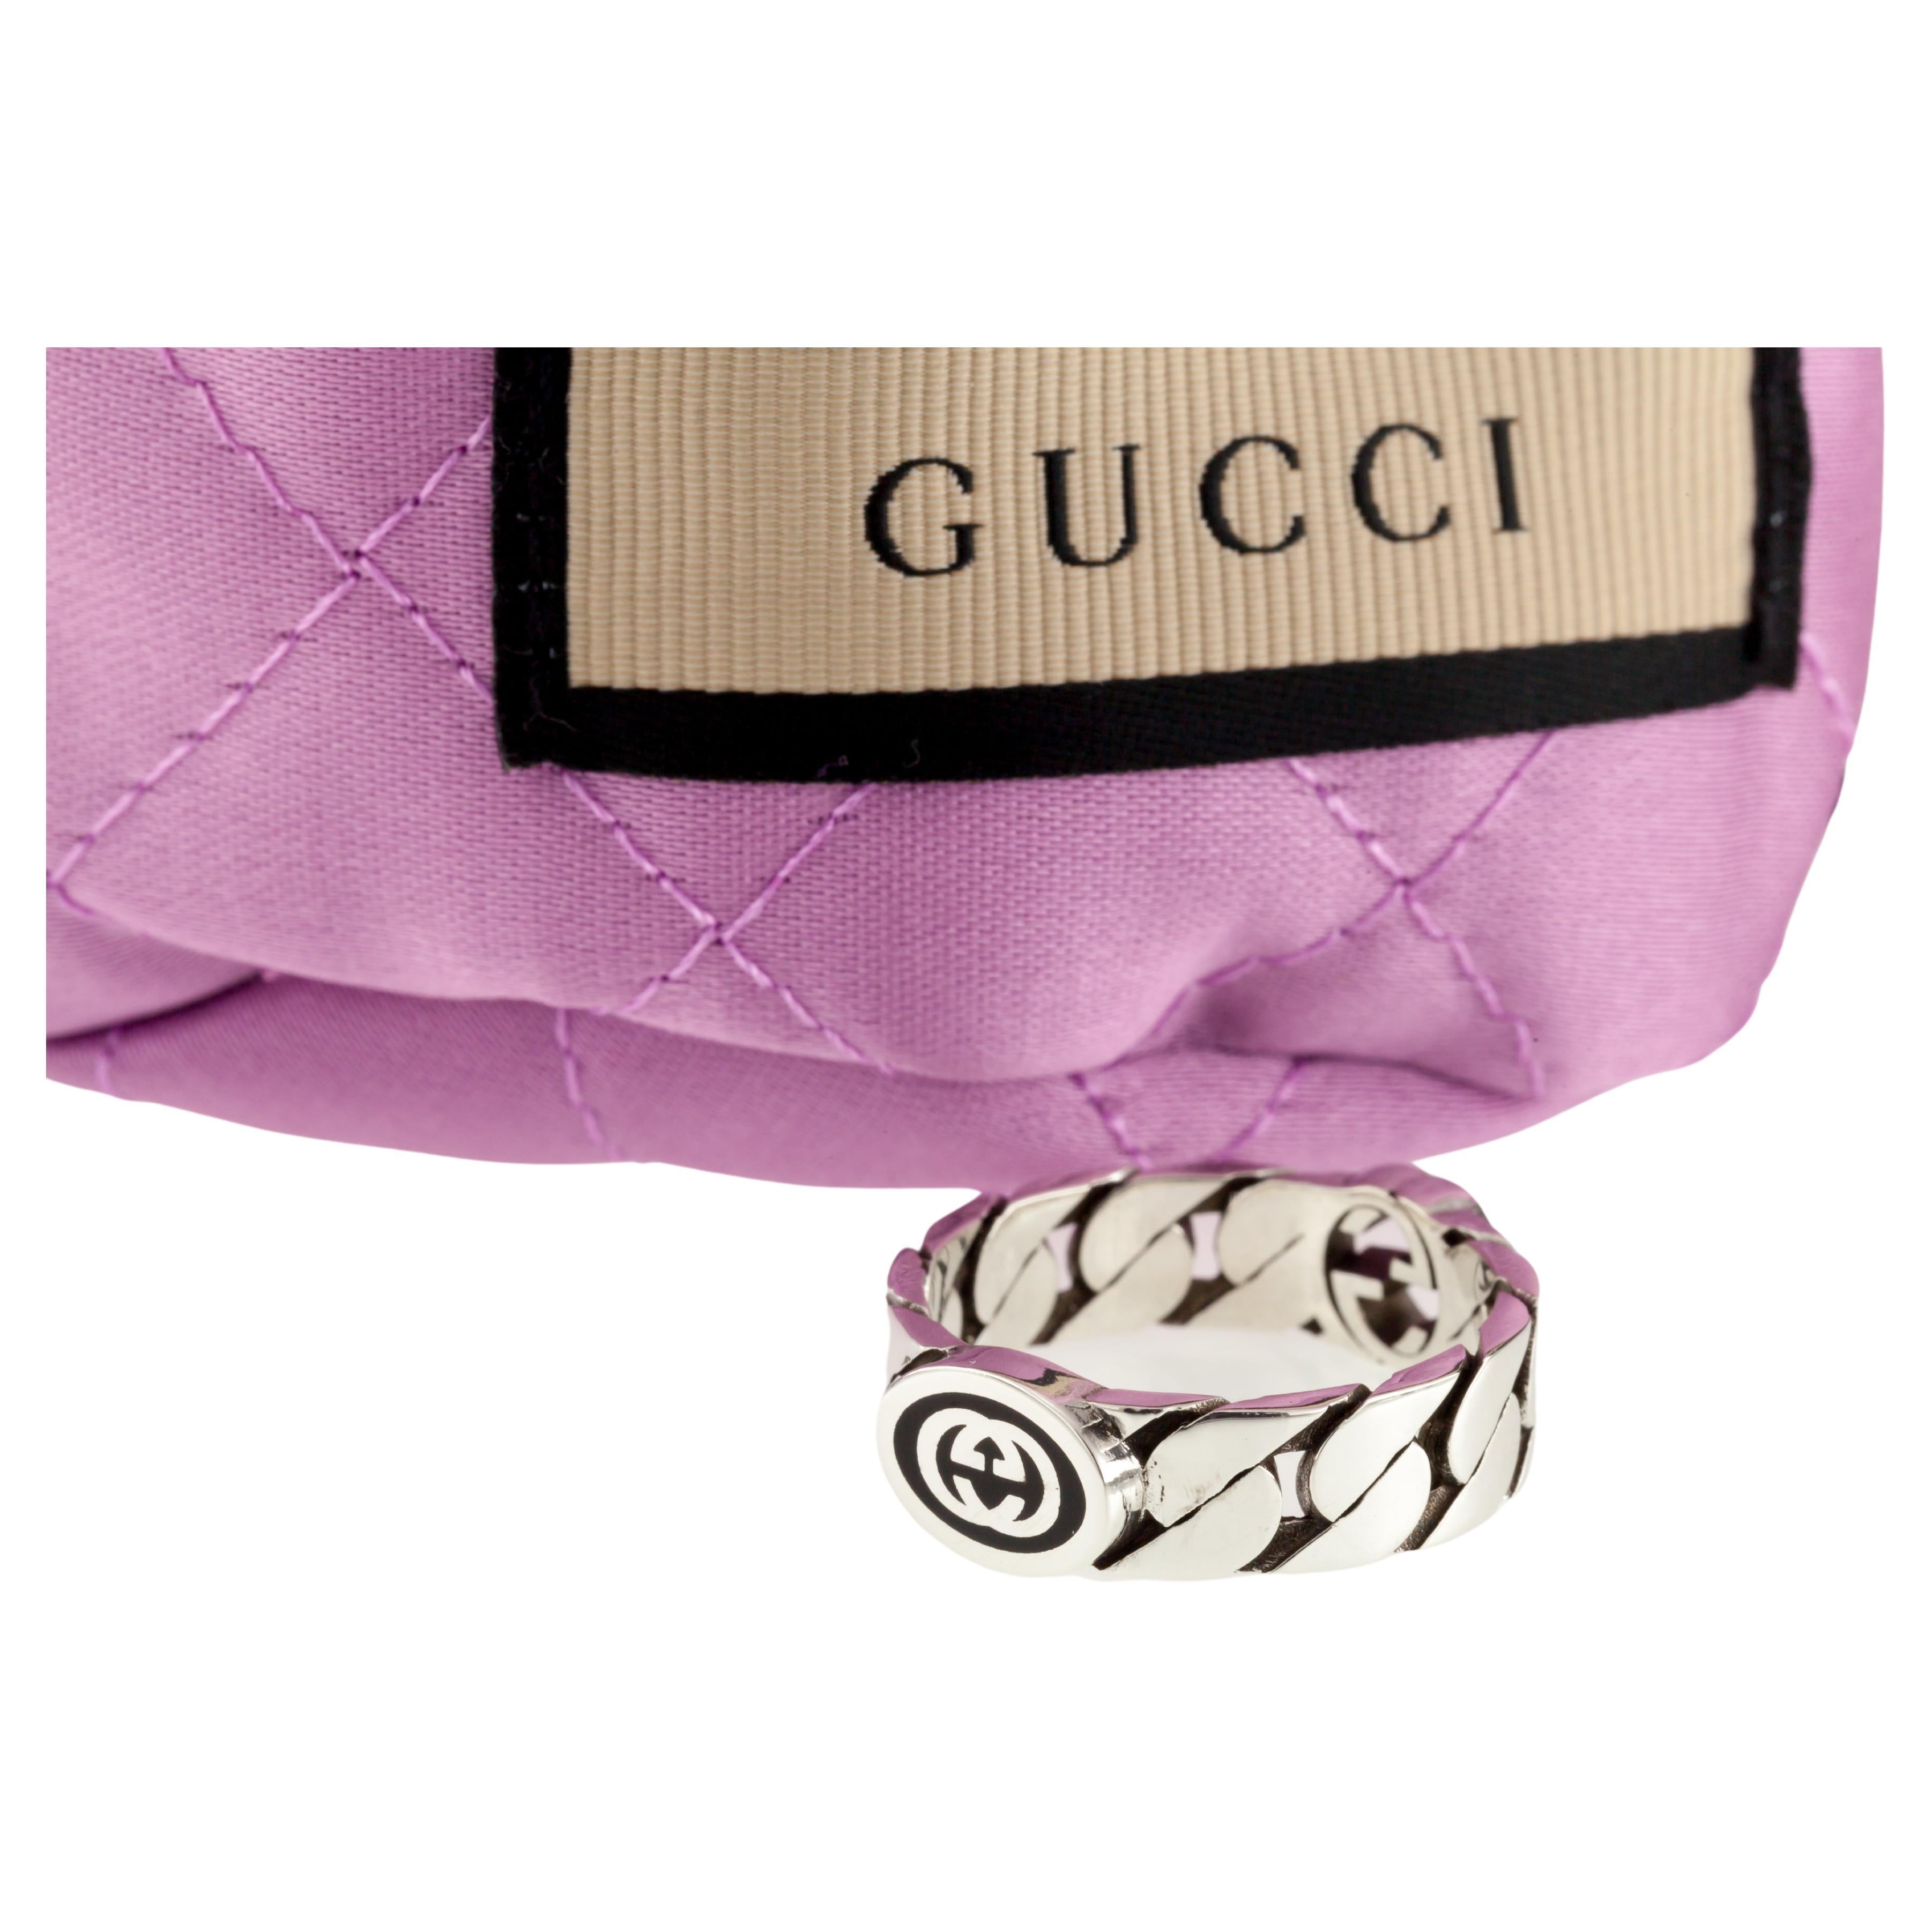 Gucci Sterling Silver Interlocking G Band Ring with Box & Pouch